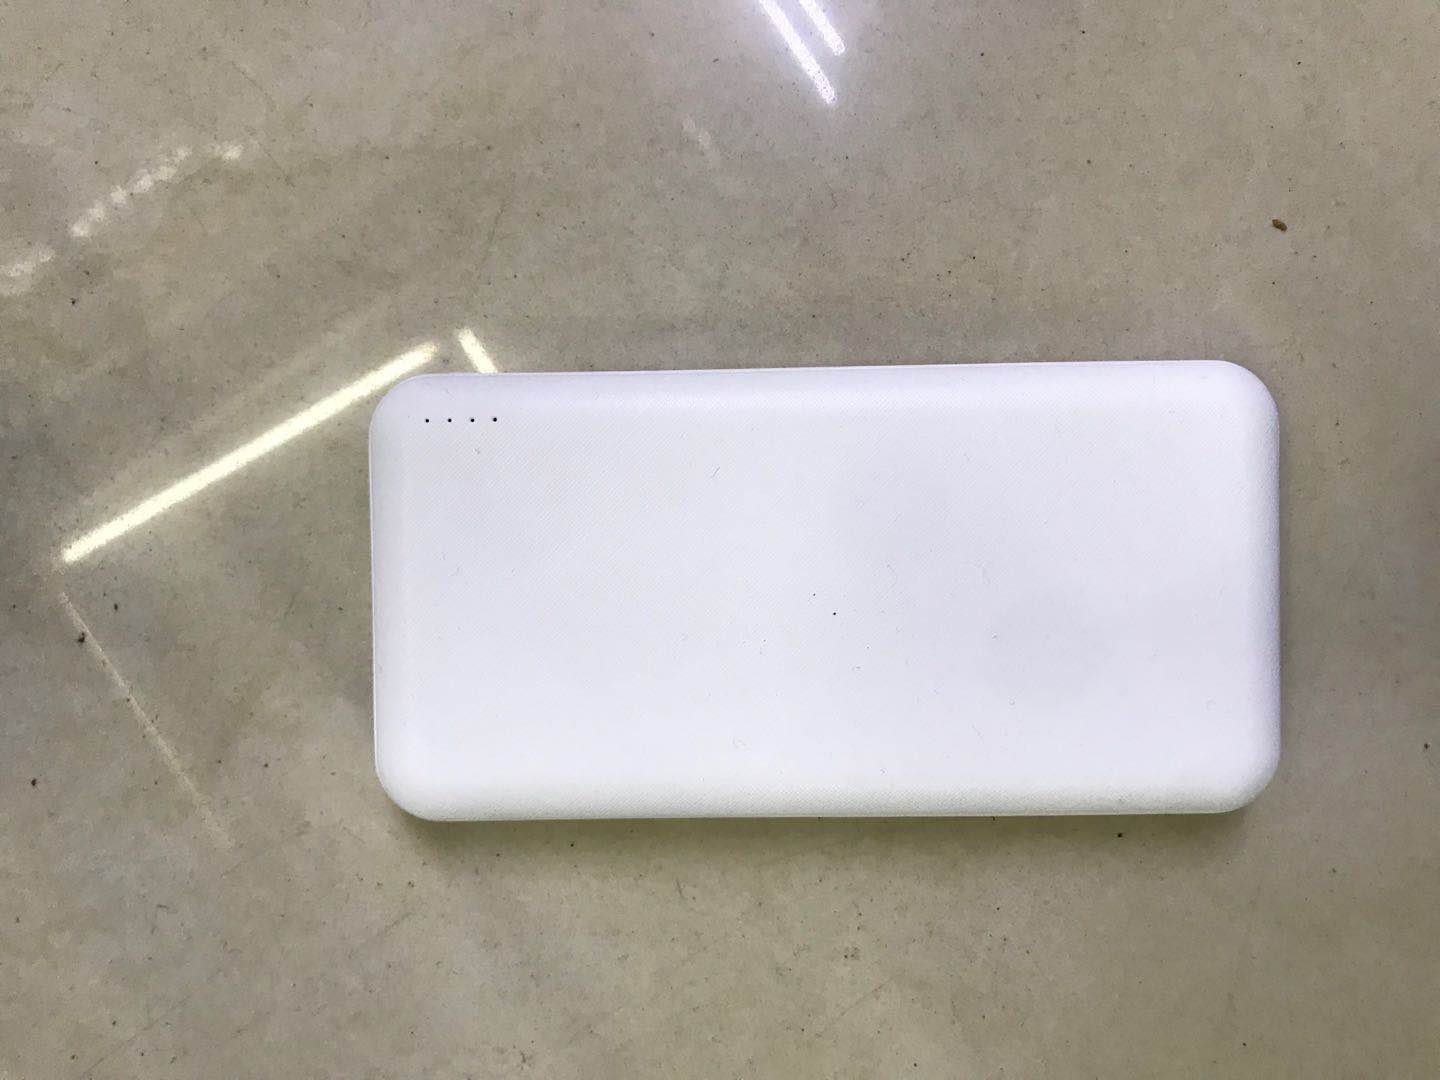 10000 MA White Flash Charge Power Bank Large Capacity Ultra-Thin Compact Portable Suitable for Xiaomi Apple Hua